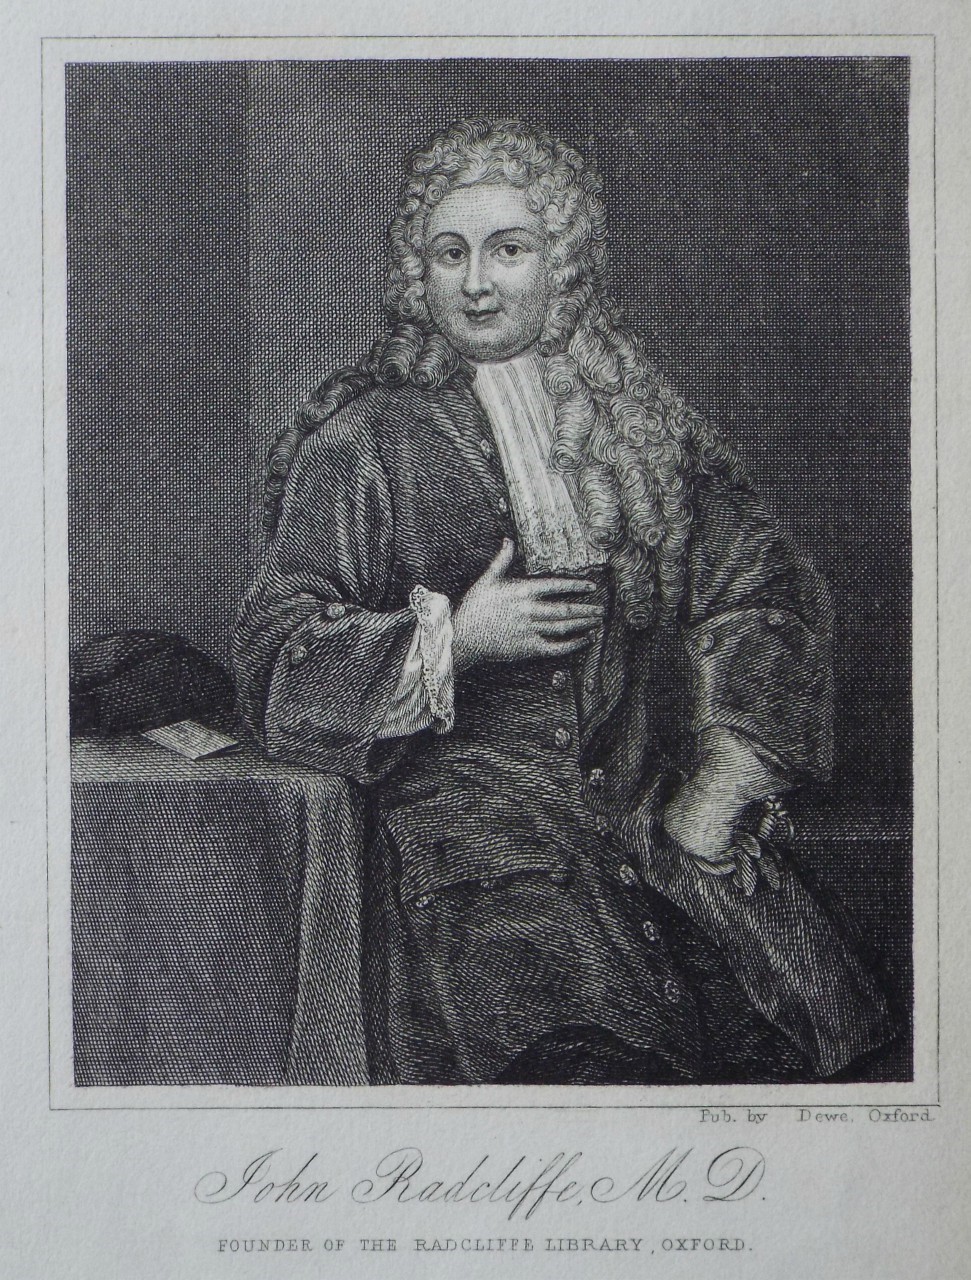 Print - John Radcliffe, M.D. Founder of the Radcliffe Library, Oxford.